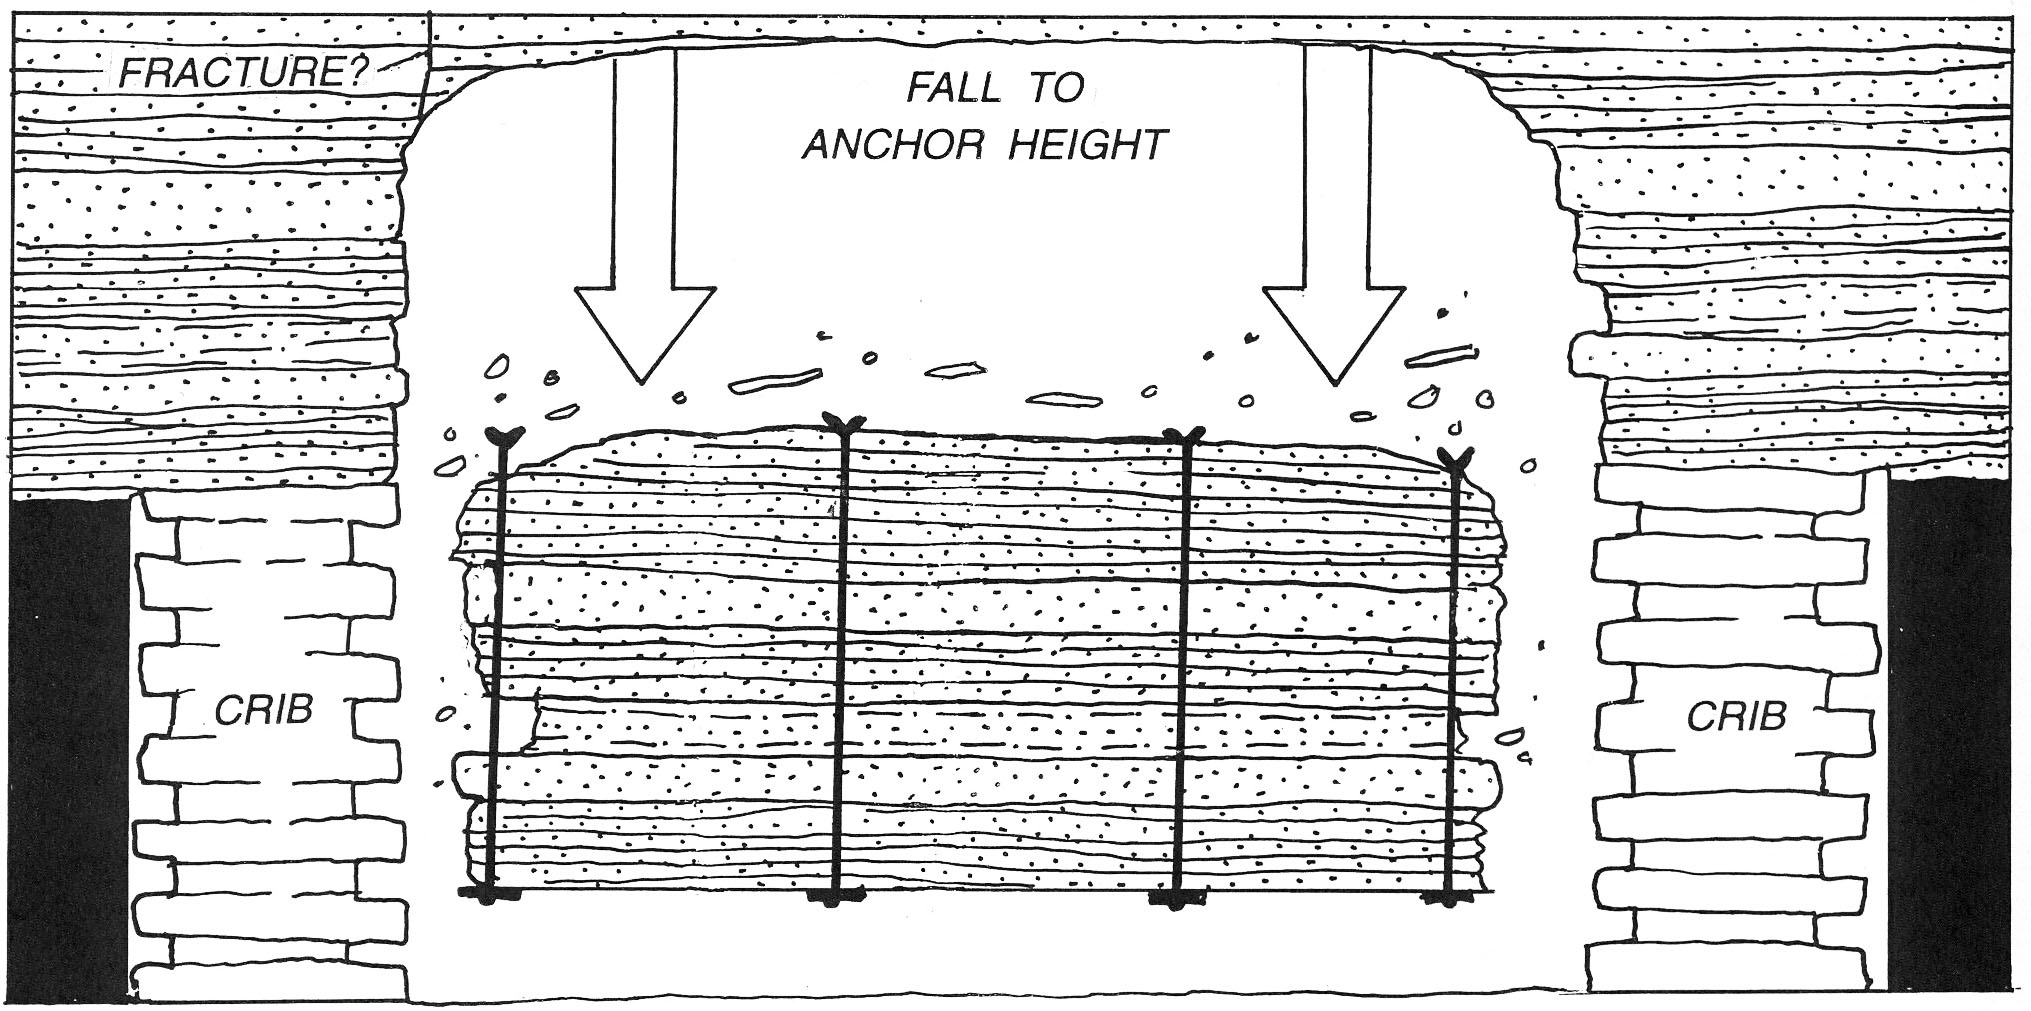 Falls have been documented to the height of roof-bolt anchors in stackrock roofs. 